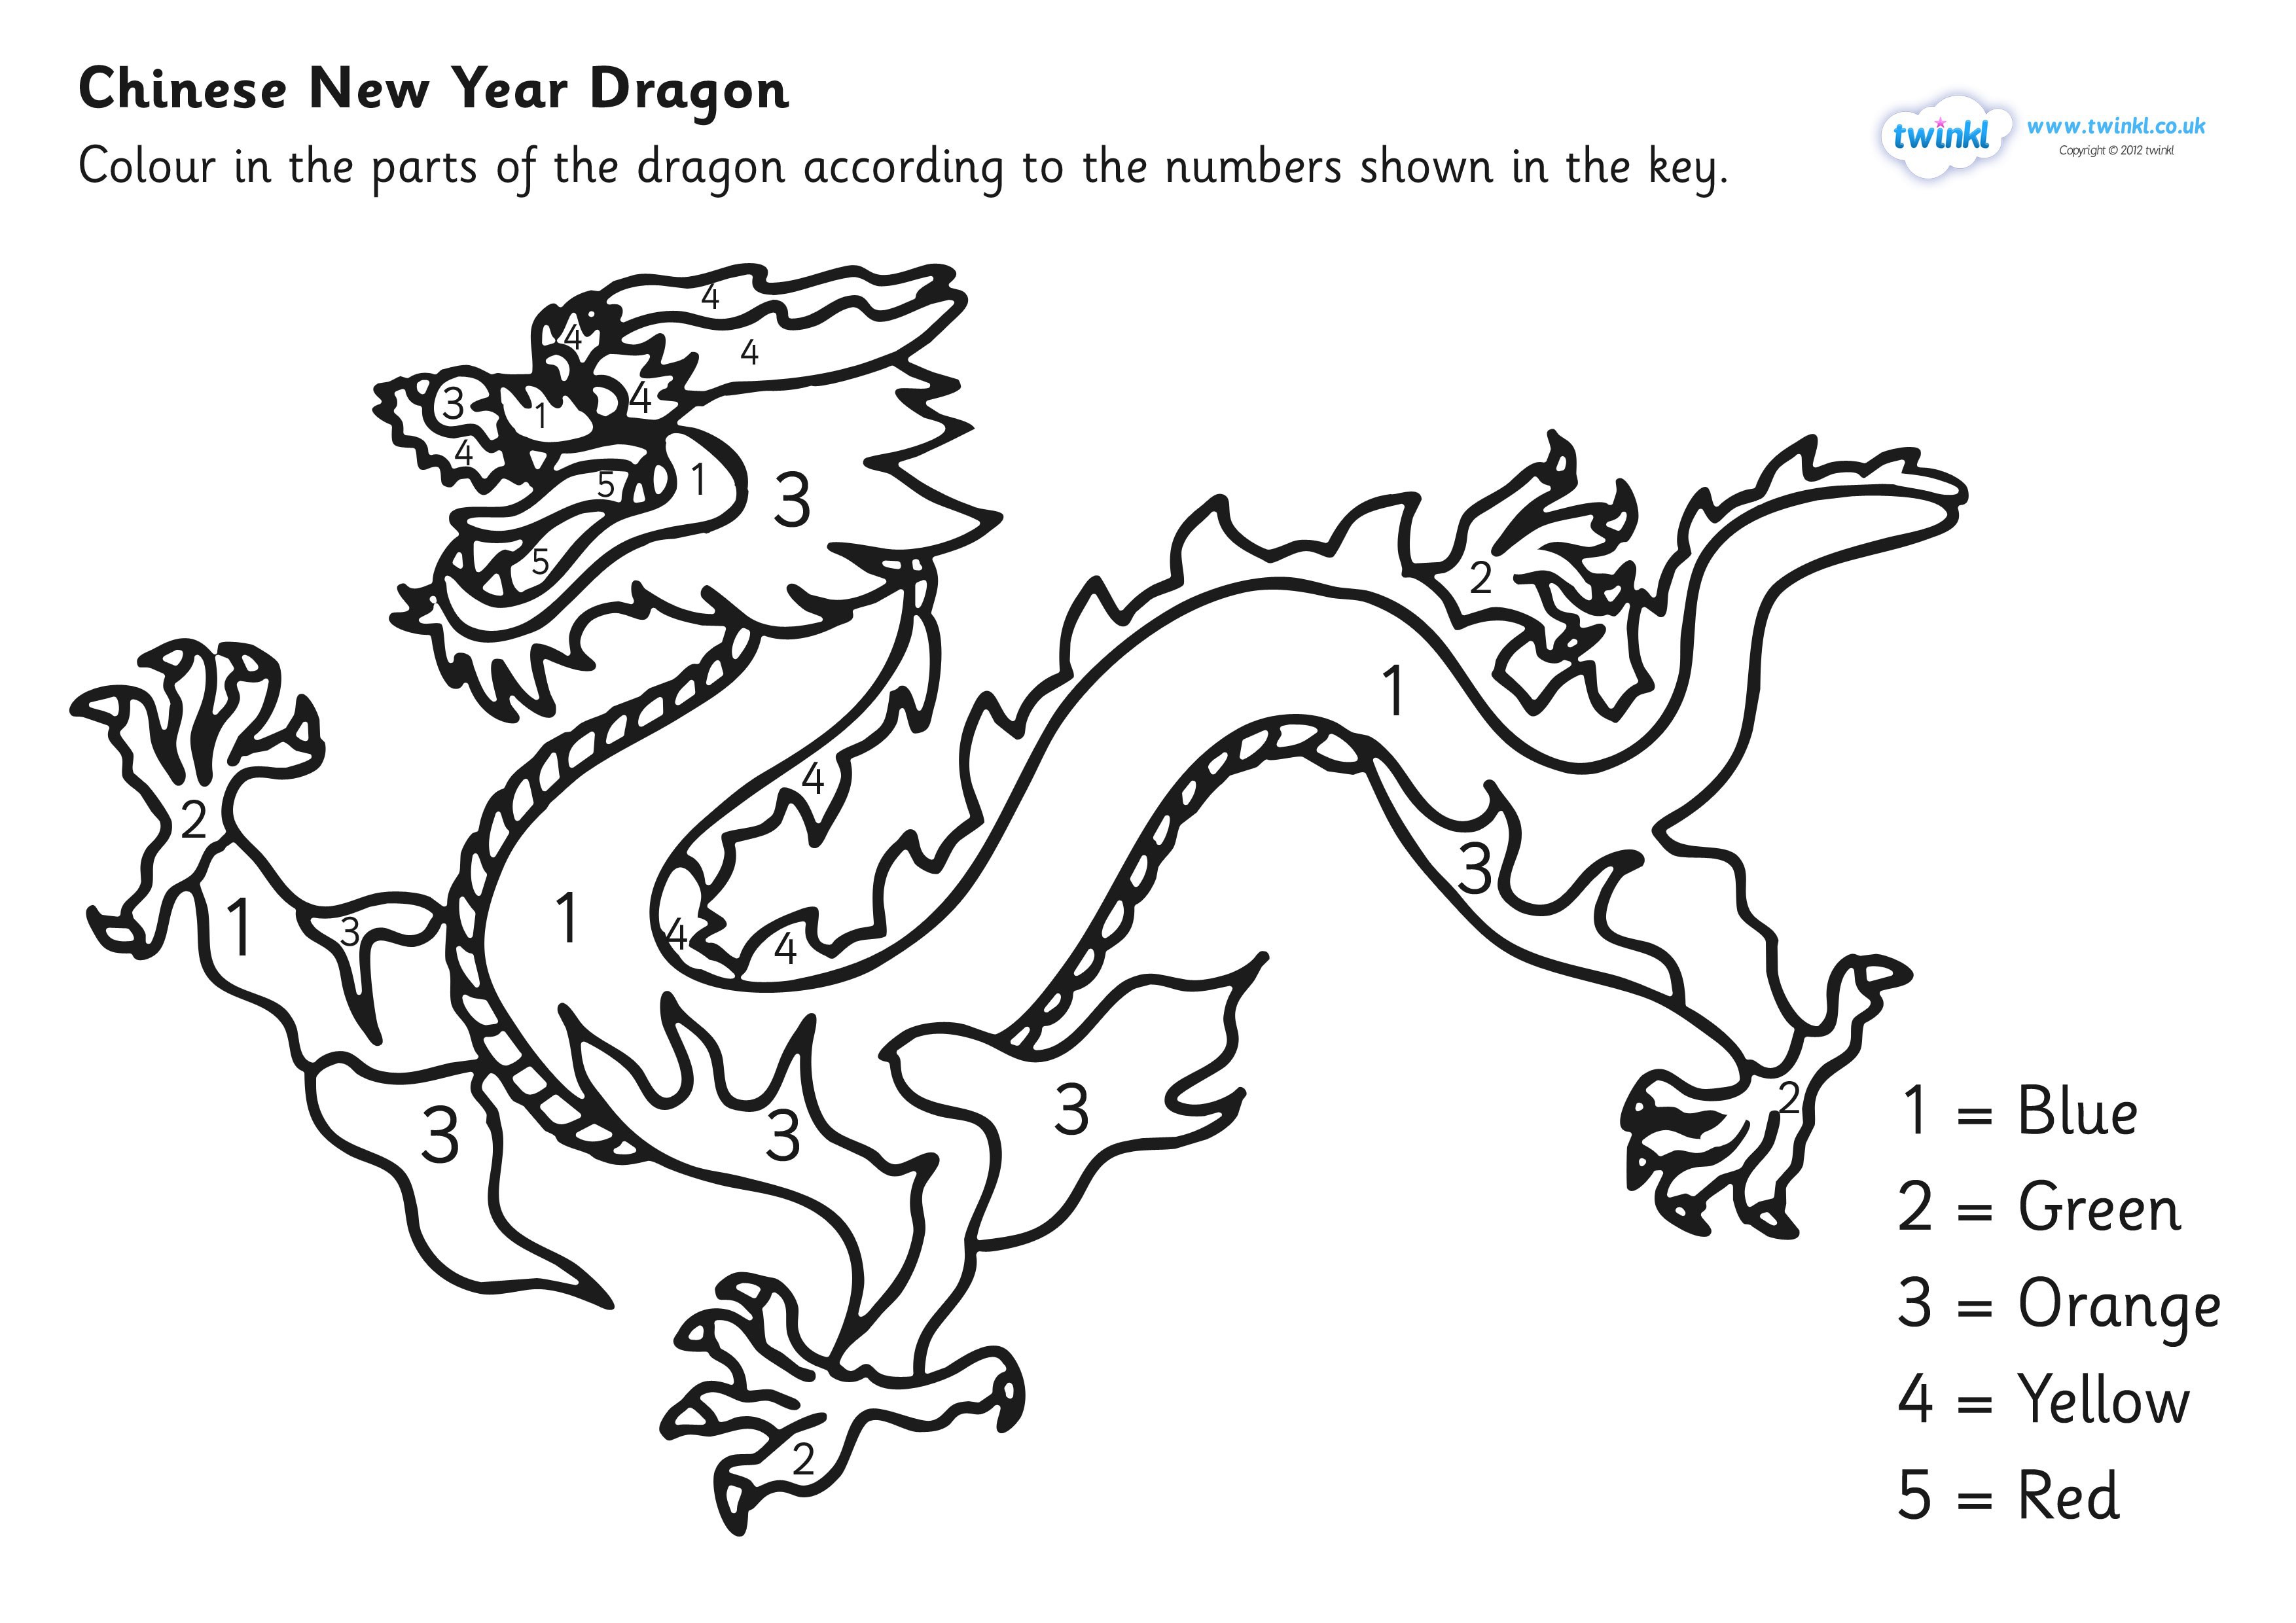 Chinese New Year Coloring Page Fresh Excellent Chinese New Year Dragon Coloring Page Colouring by Numbers